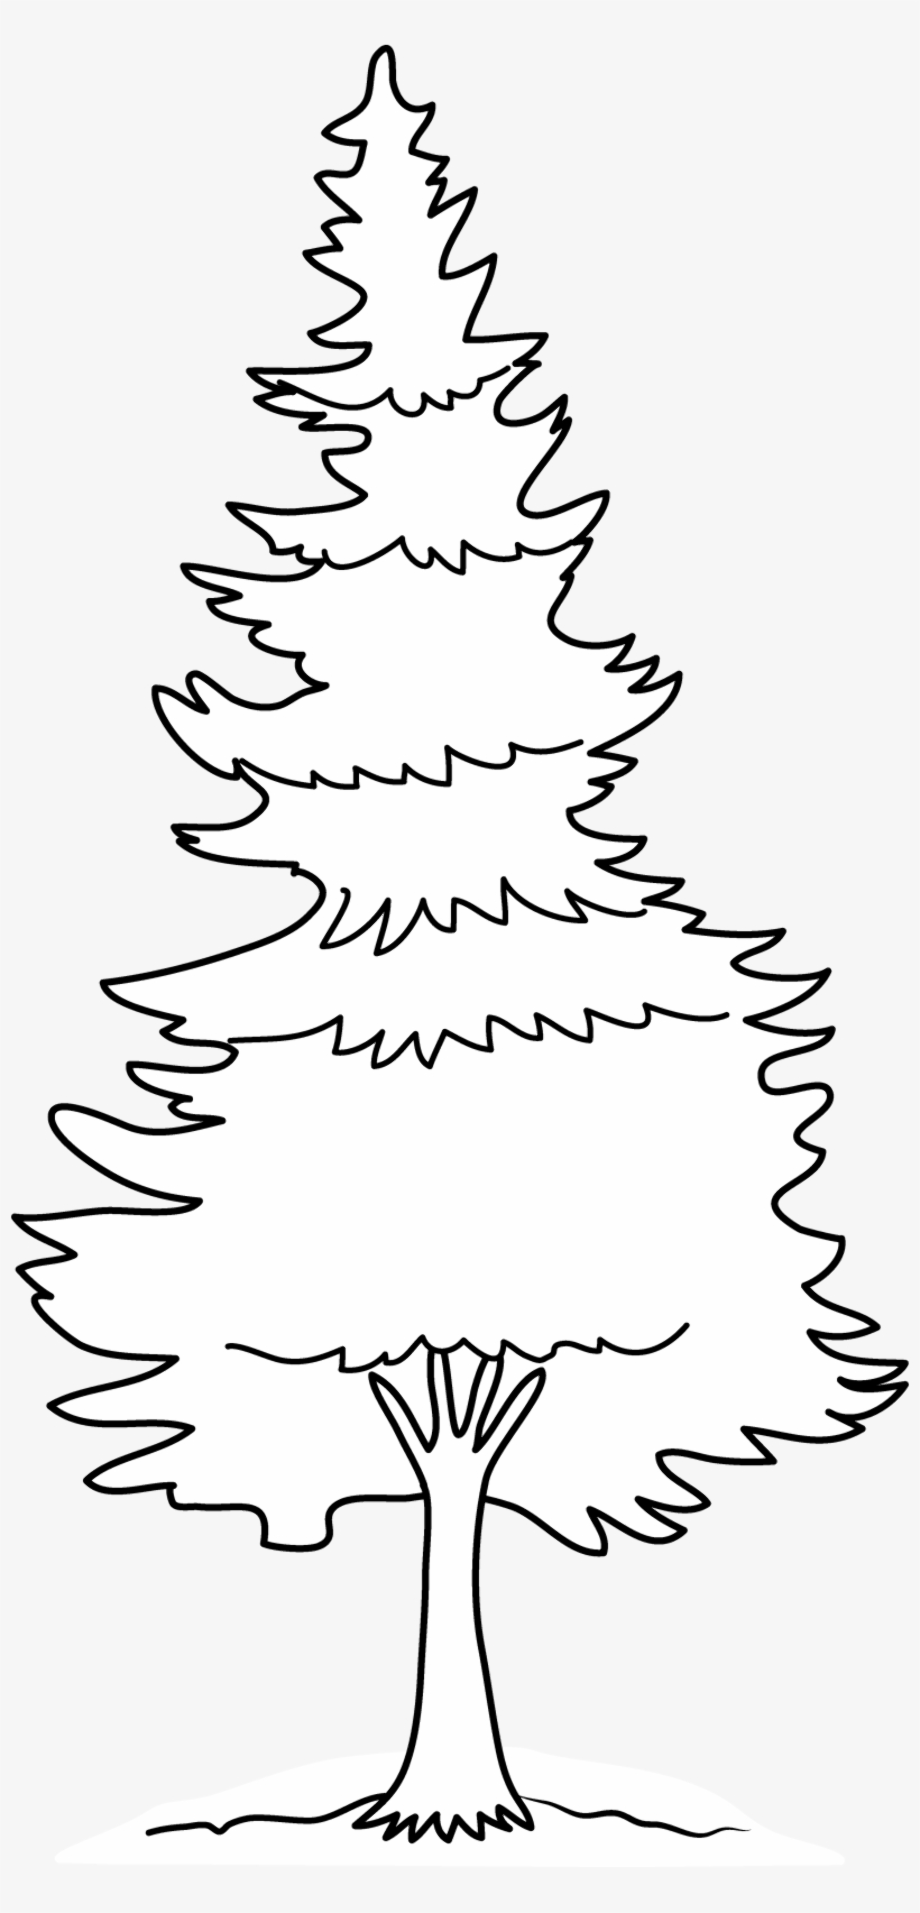 Download High Quality pine tree clip art outline